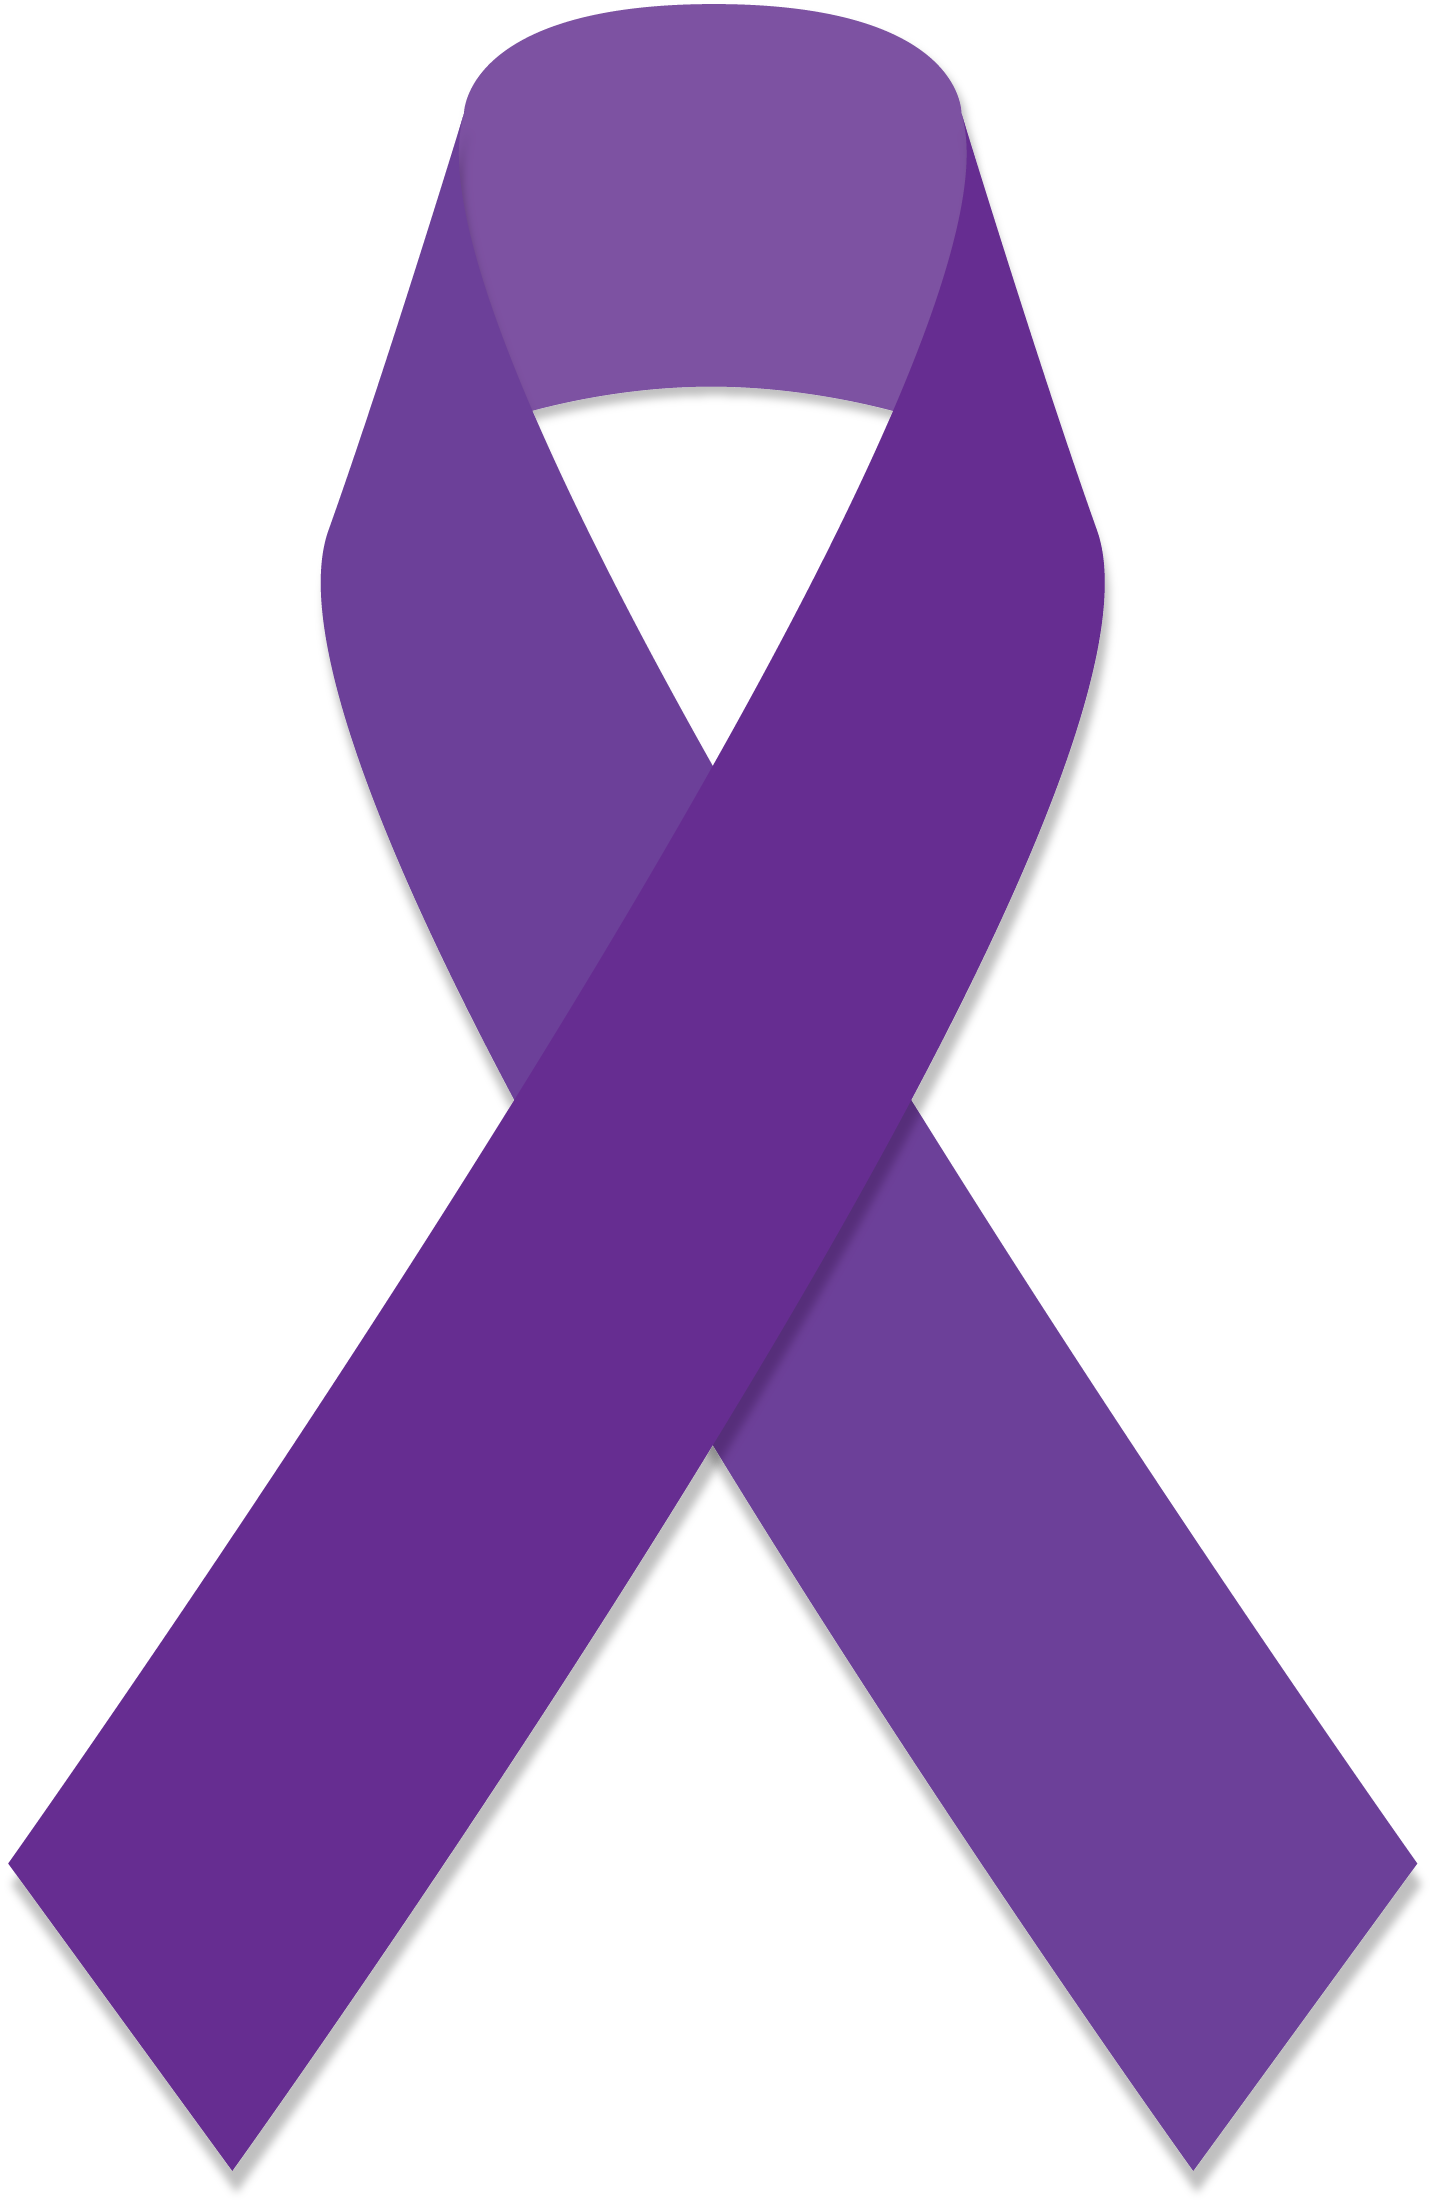 Purple Cancer Ribbons Clip Art